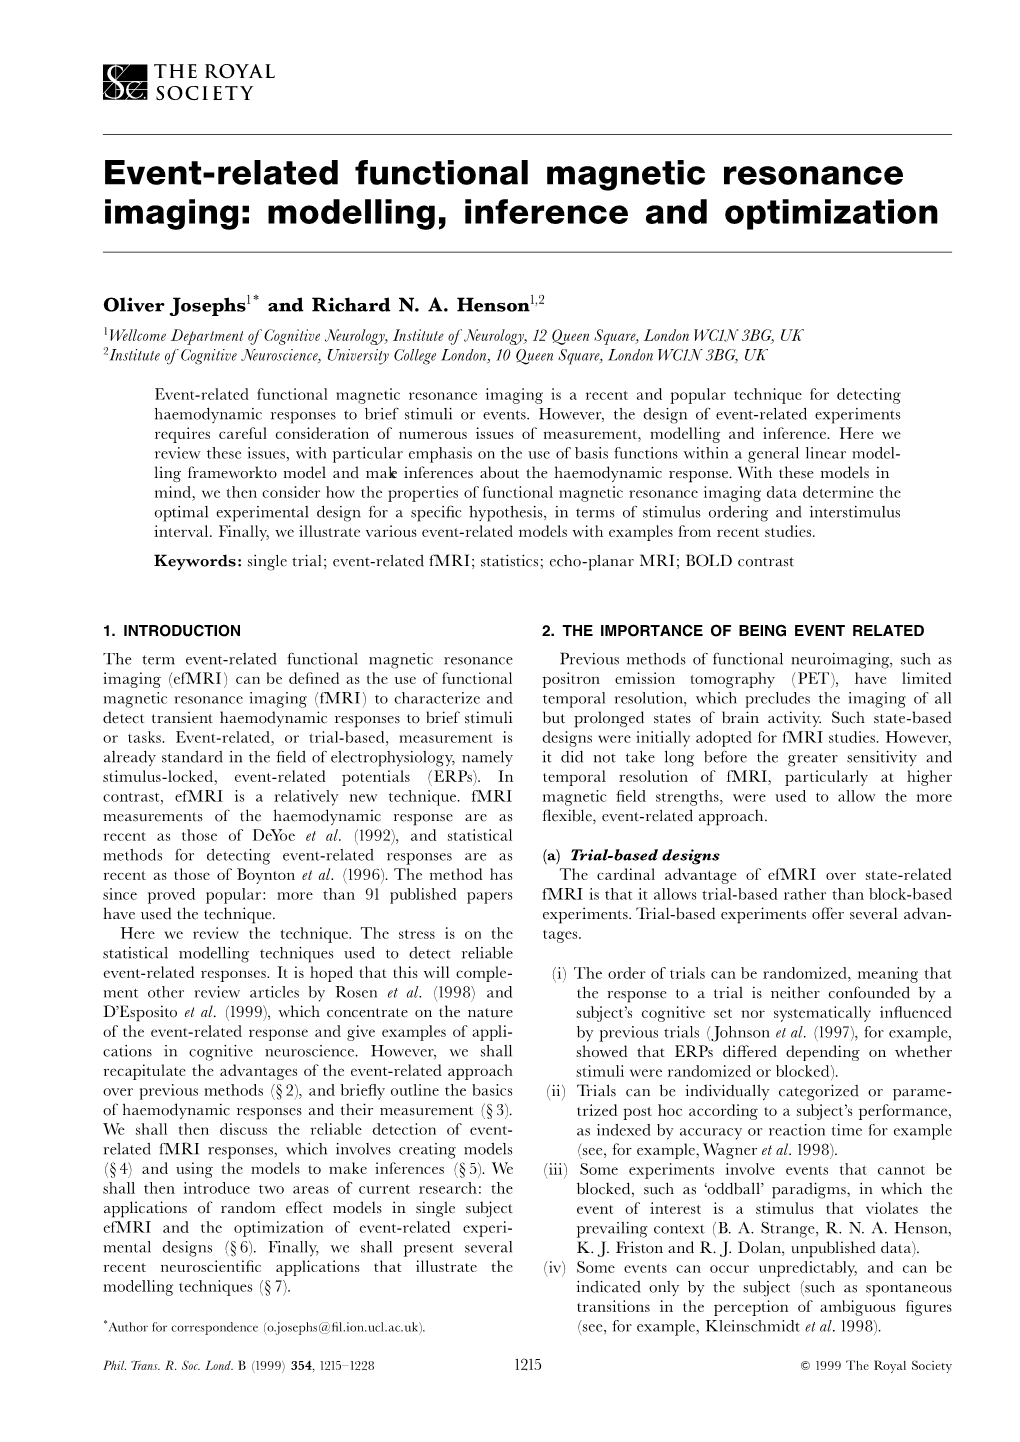 Event-Related Functional Magnetic Resonance Imaging: Modelling, Inference and Optimization